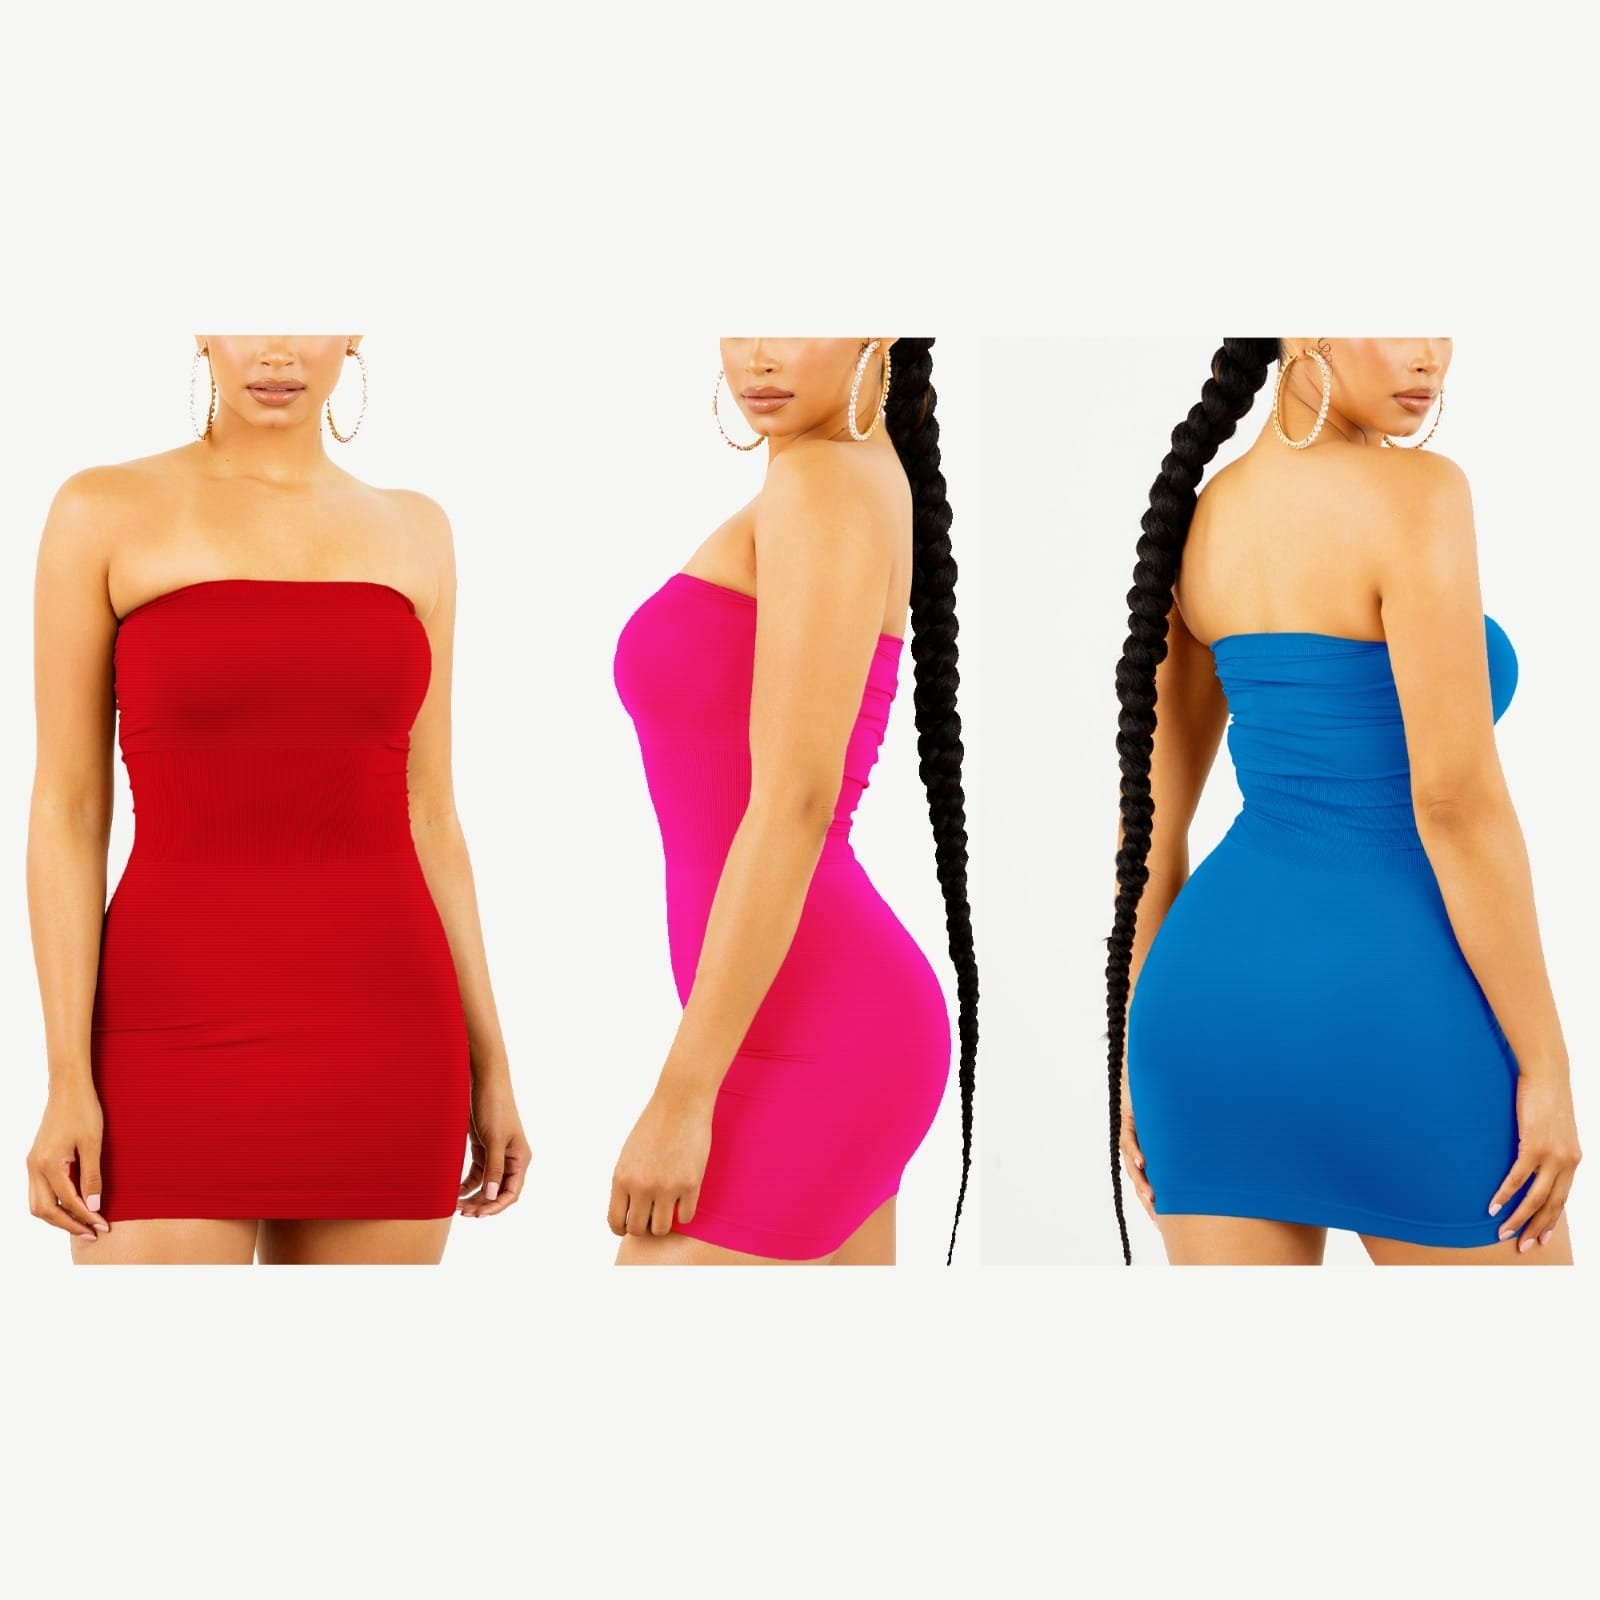 3-Pack Women's Strapless Stretchy Seamless Tight Fit Body Con Mini Tube Top Dress - BLUE, XS